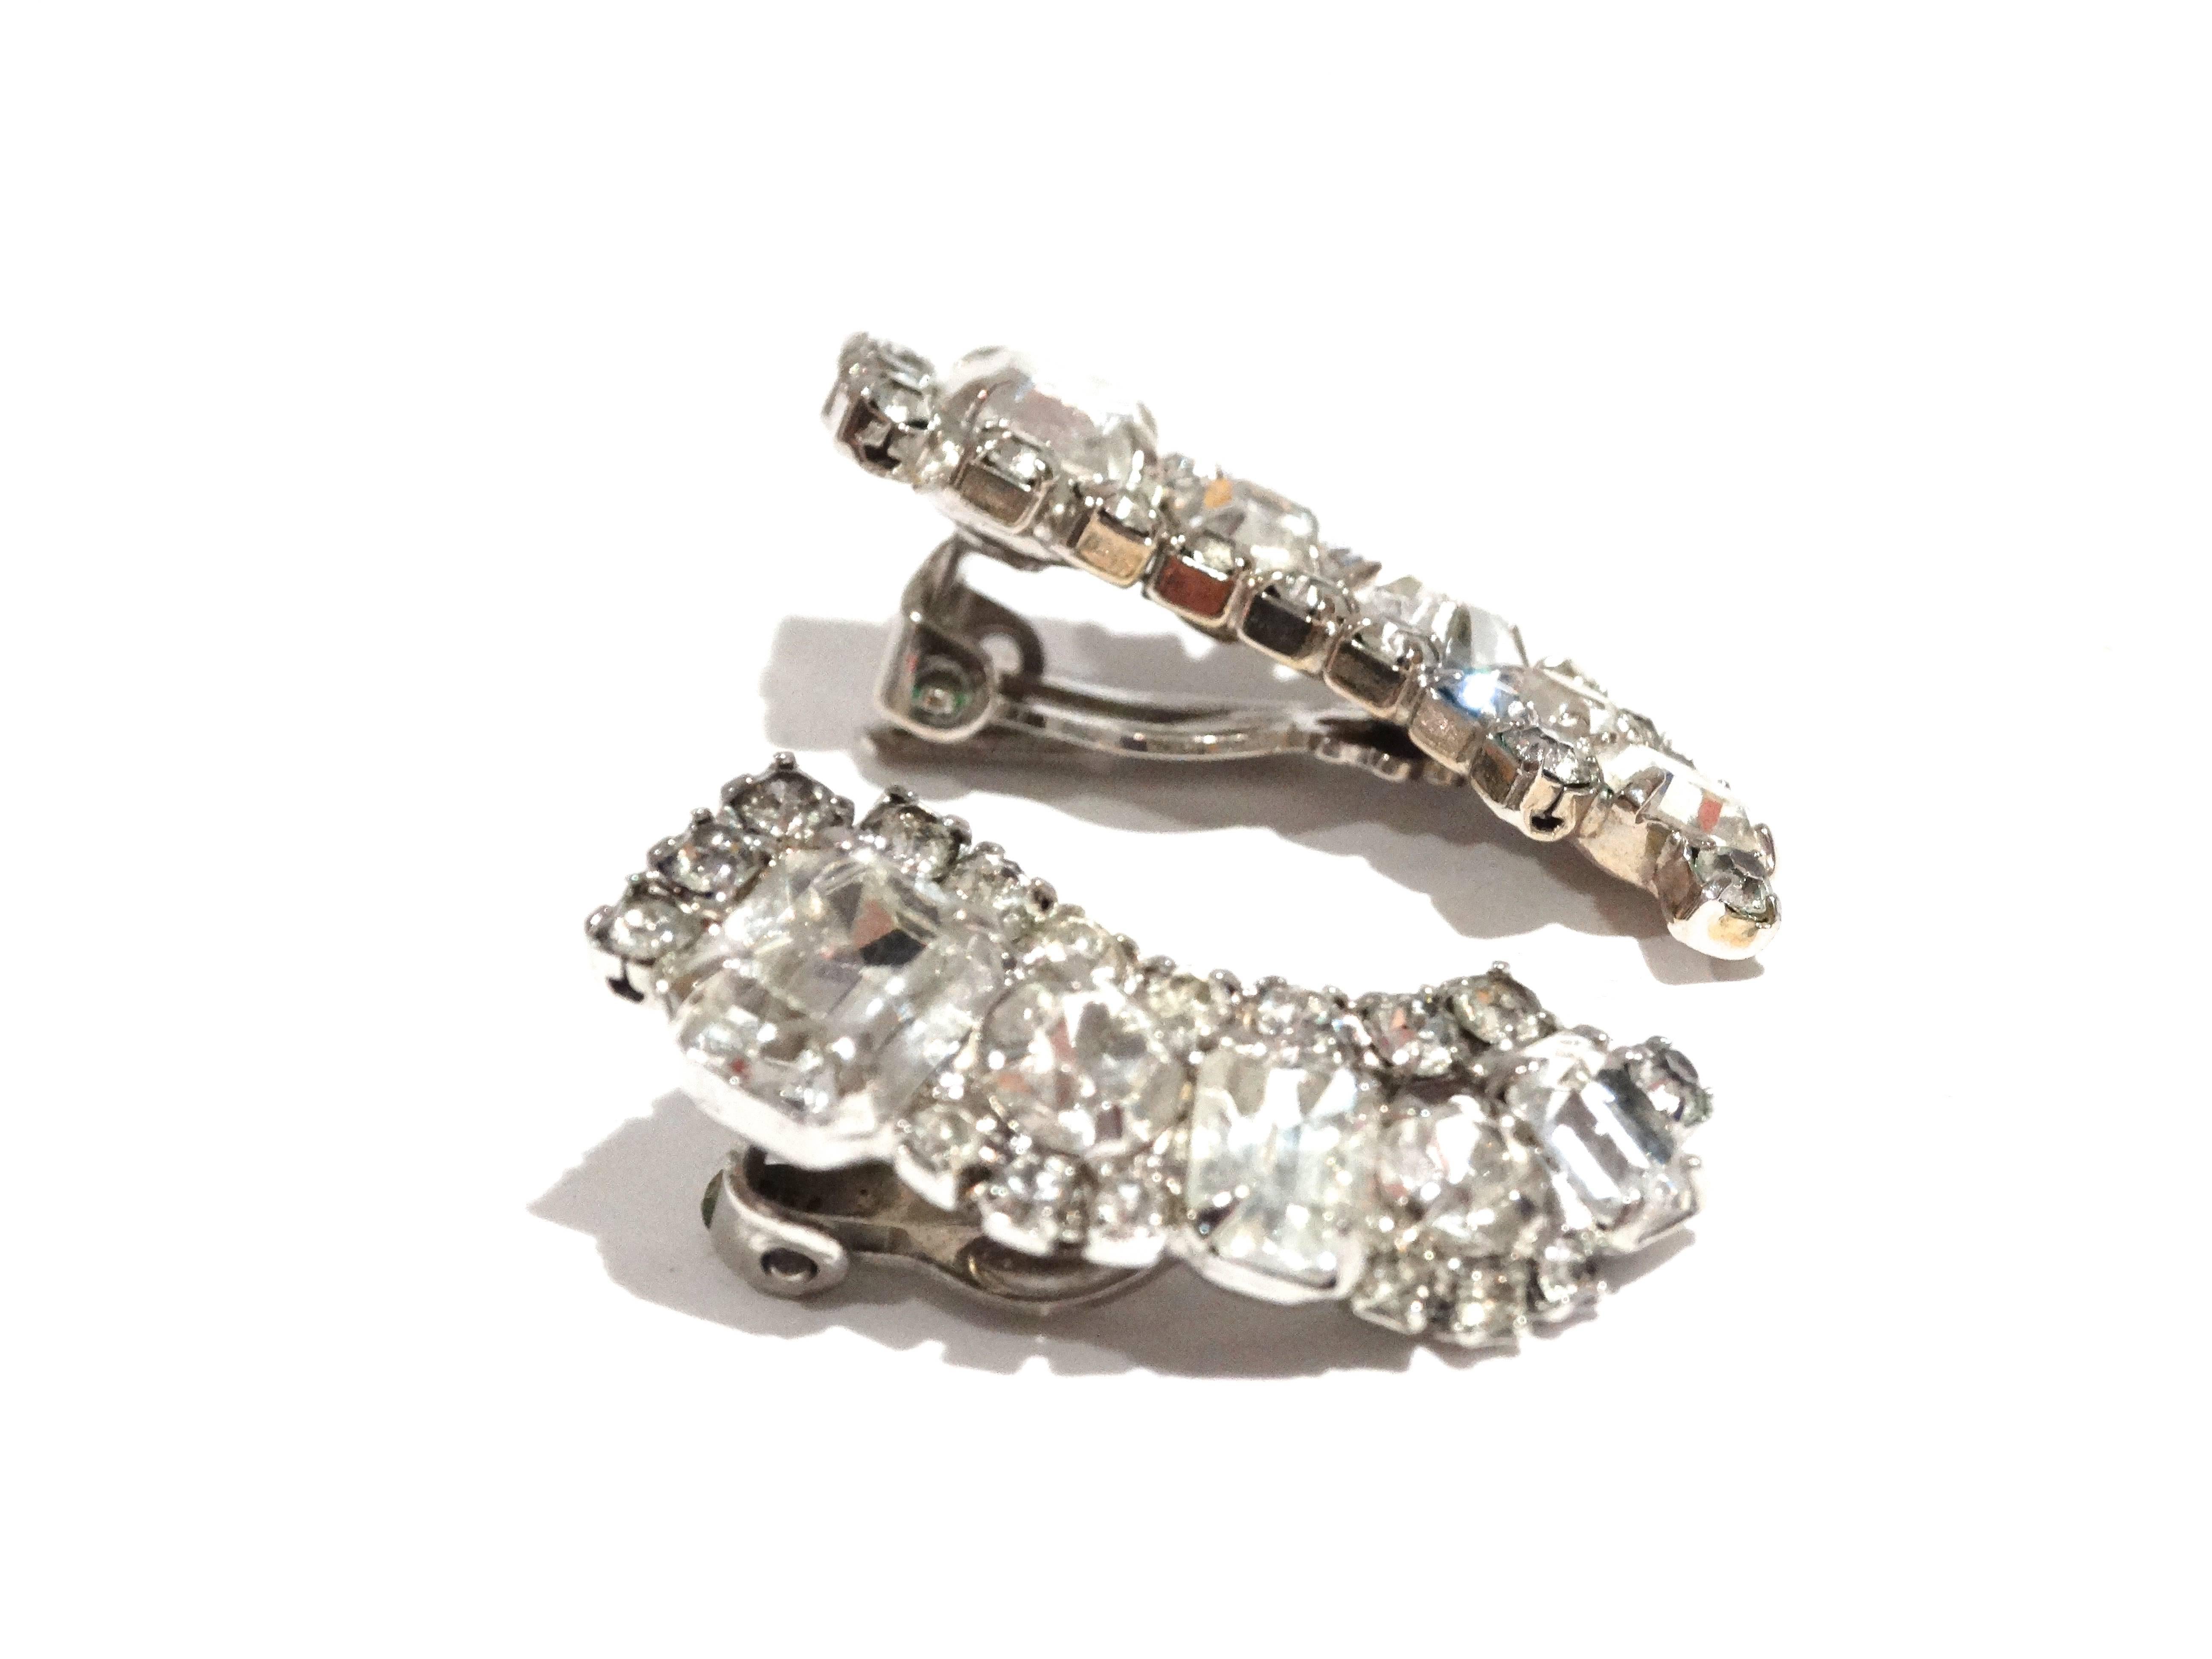 Gorgeous Signed Weiss Rhinestone Earrings which climb up the earlobe. Featuring emerald cut stones in an Art Deco style. Clip On Clip Earrings w/Clear Rhinestones. Weiss is one of the premier costume jewelry makers. All the stones are of supreme